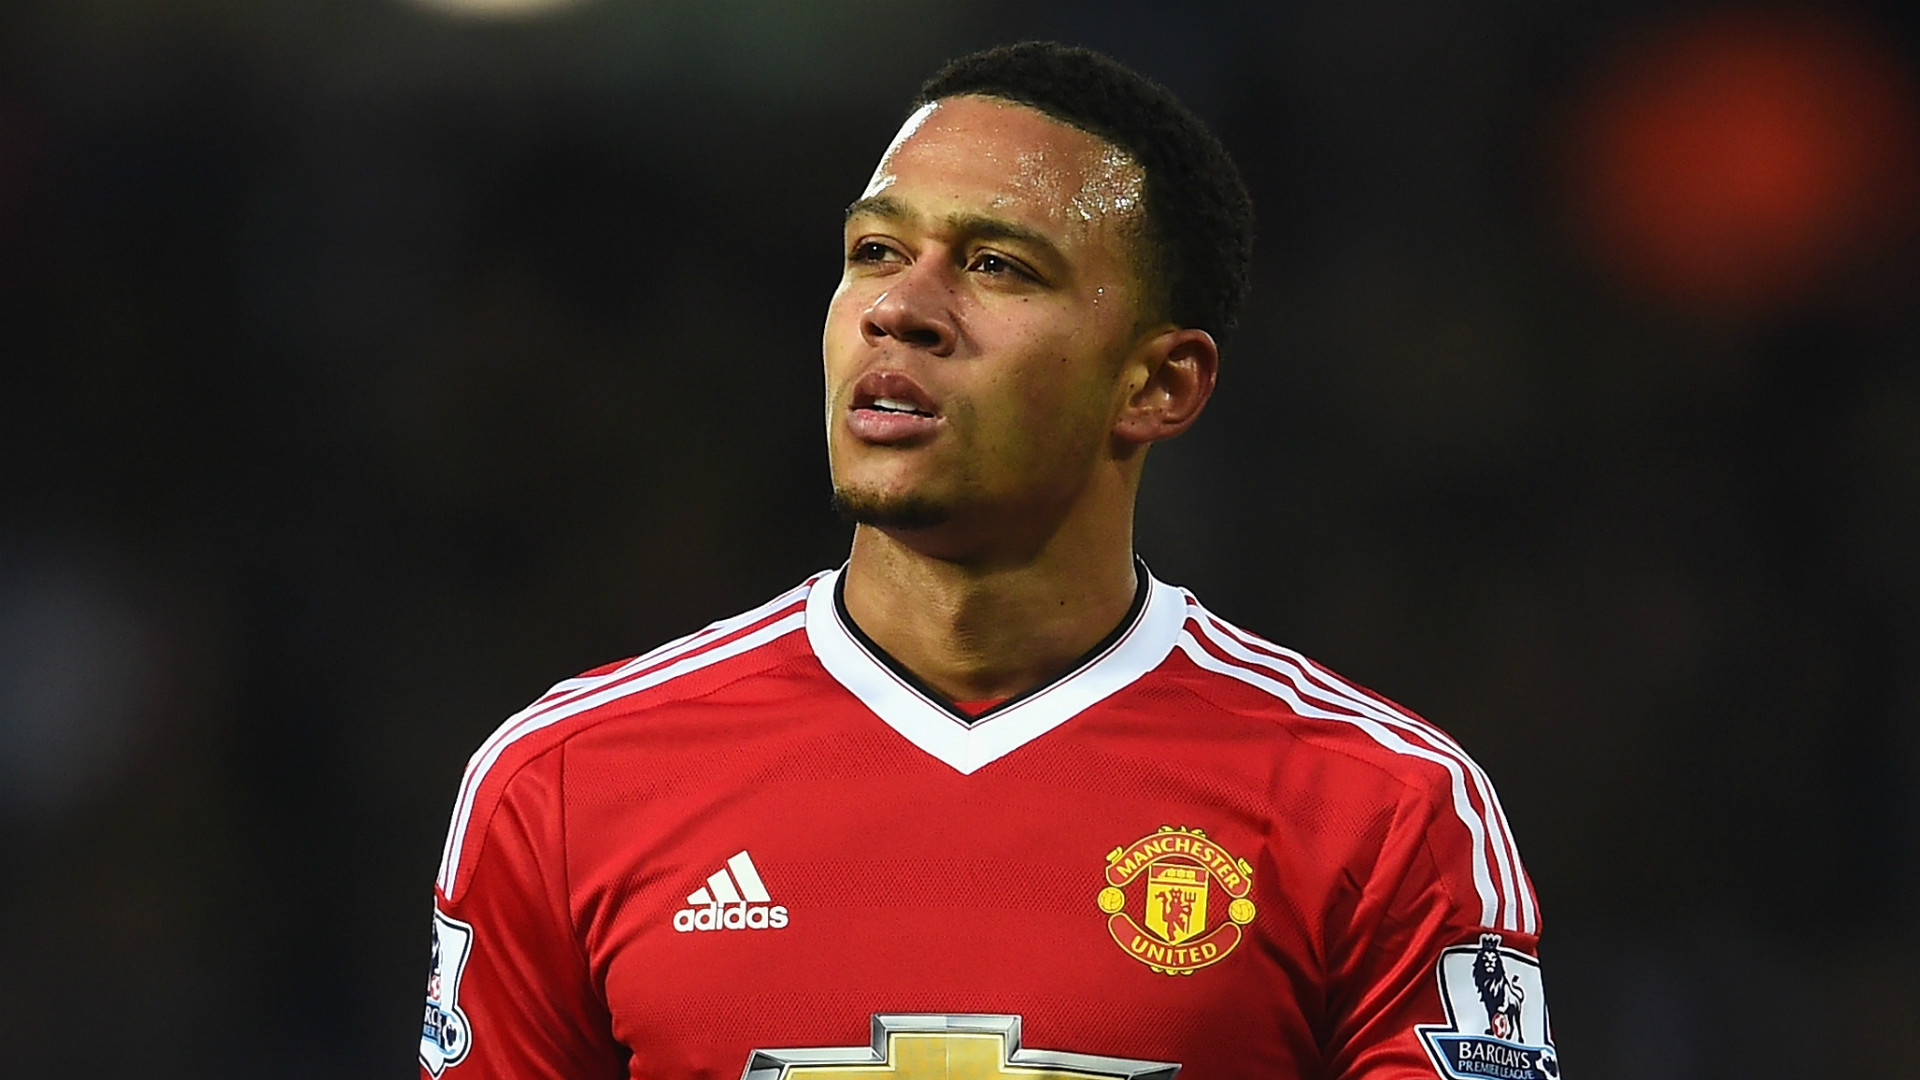 Manchester United want Memphis Depay to return to Old Trafford